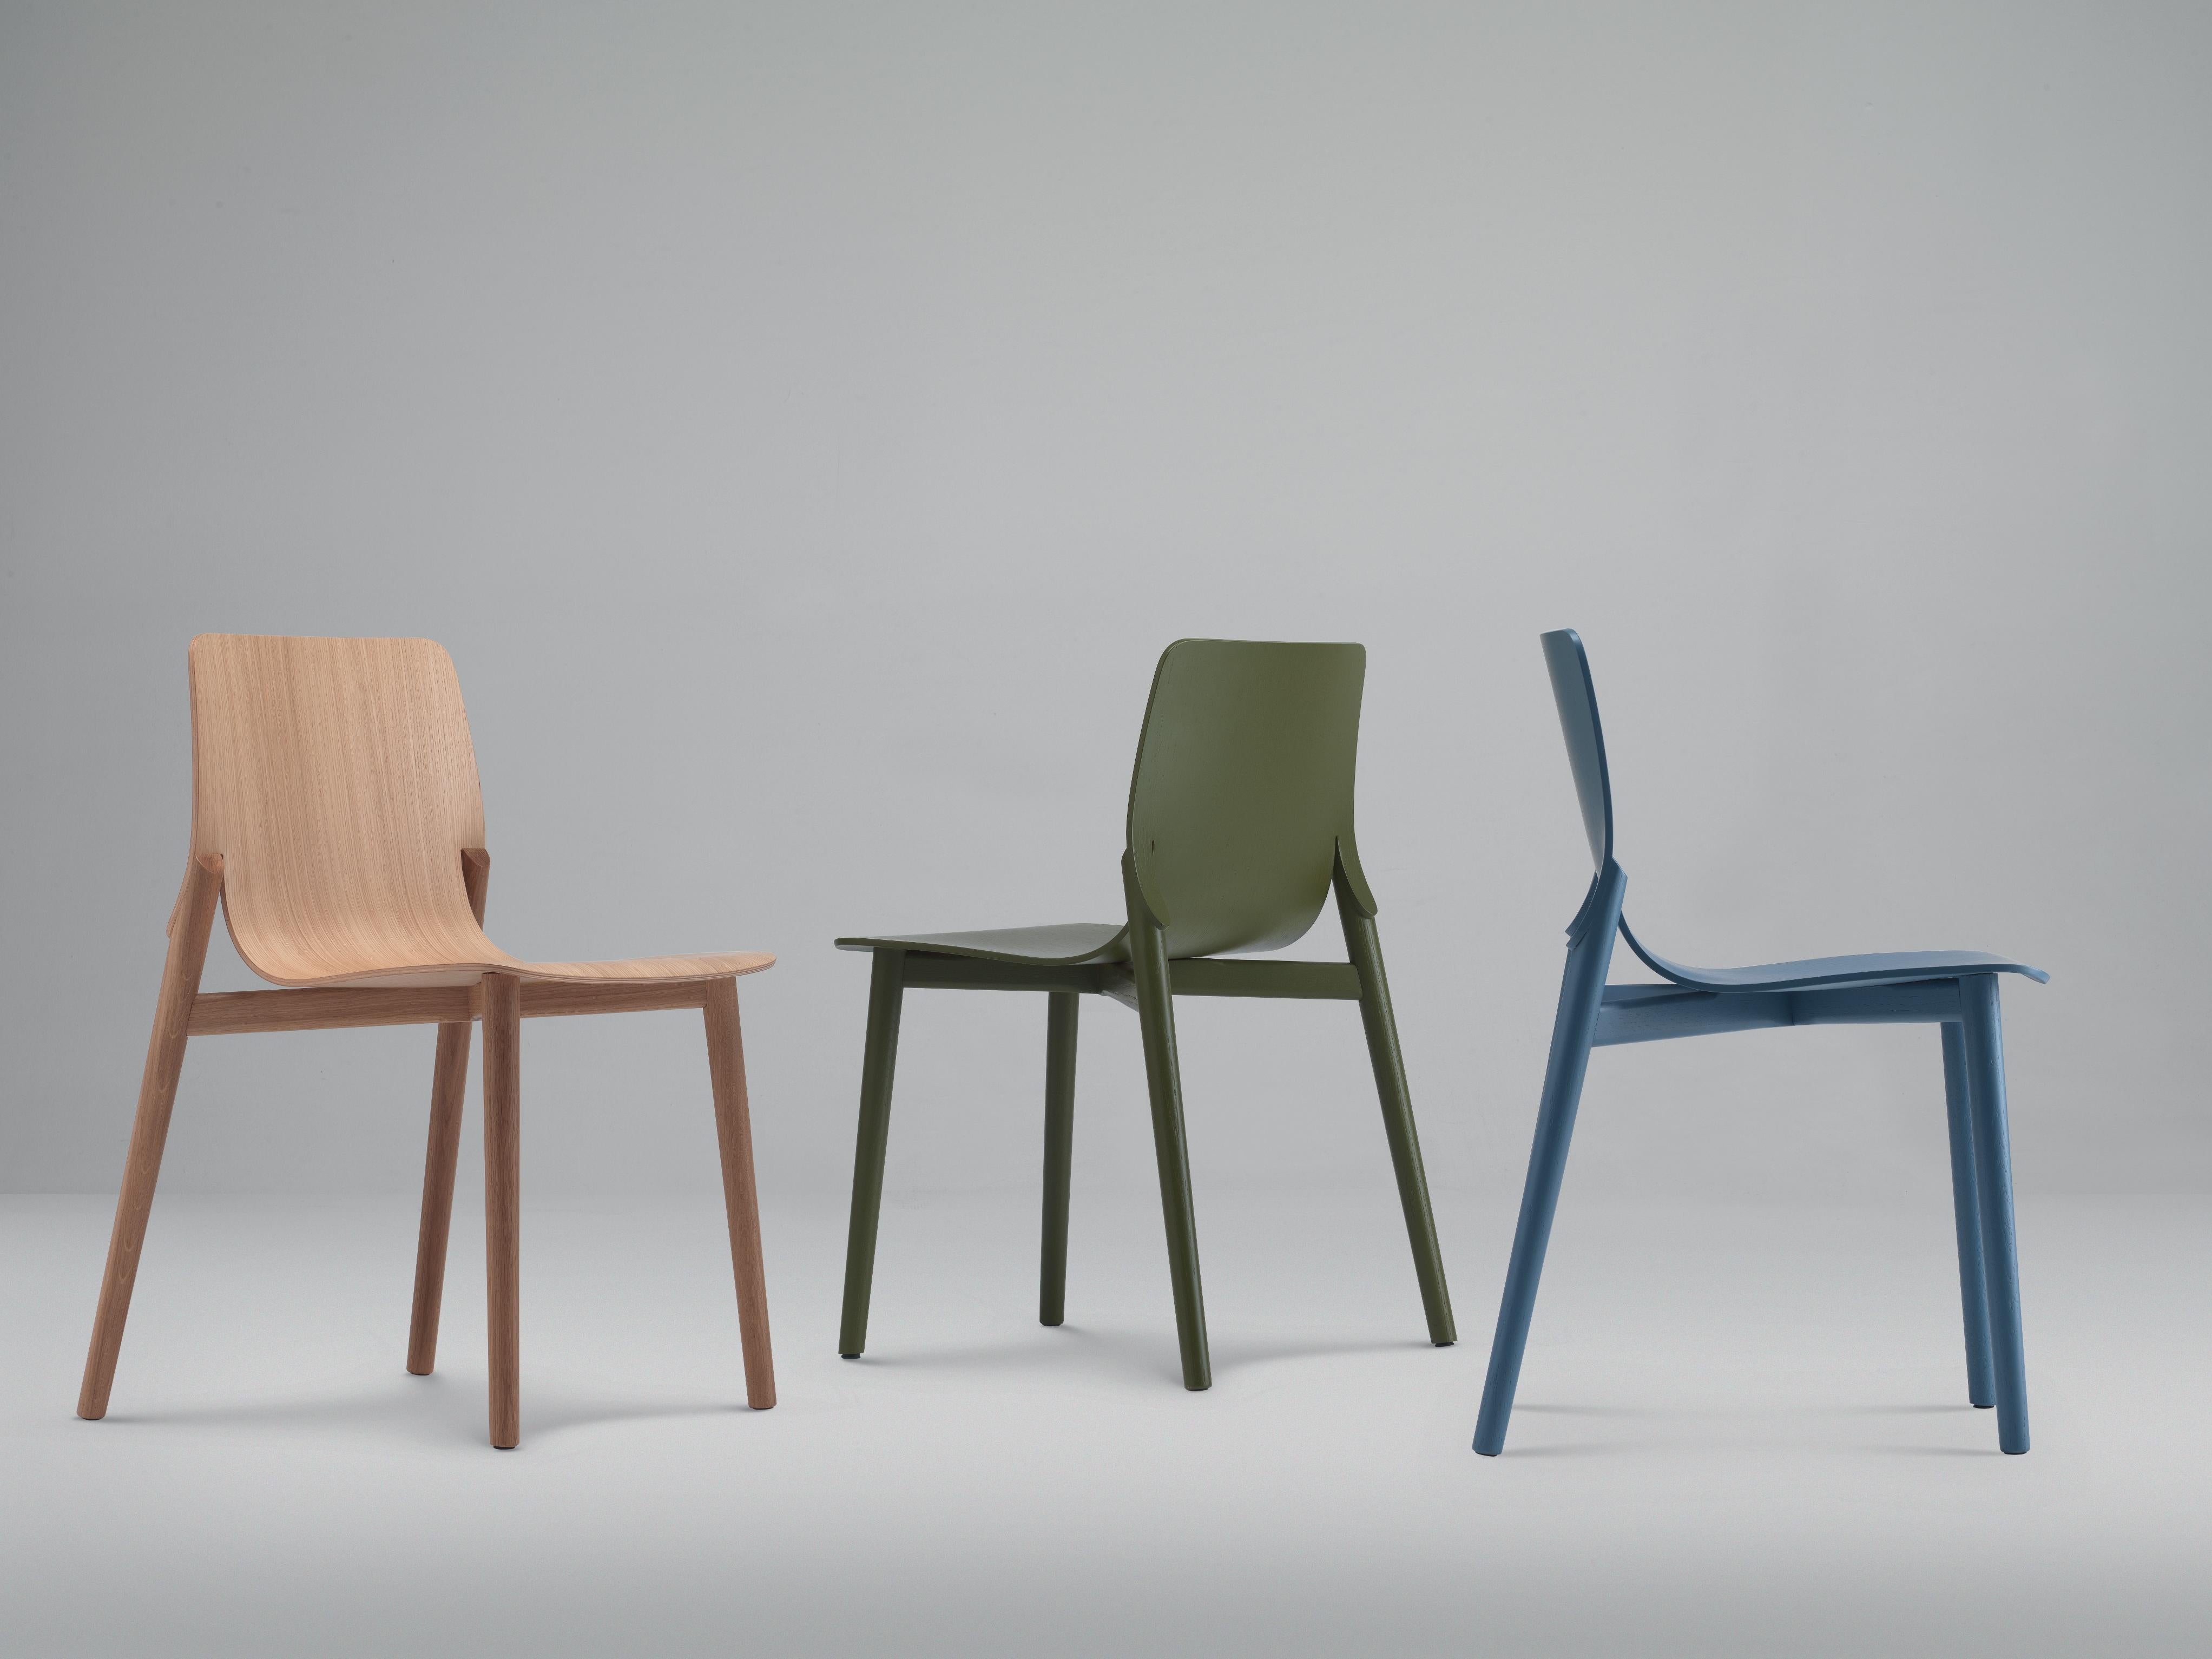 Alias 047 Kayak Chair in Black Oak Stained Seat and Frame by Patrick Norguet

Chair with solid oak or beech structure and Seat in curved oak or beech veneered plywood. Finishes: transparent varnish, walnut, dark oak, or coloured stains. On